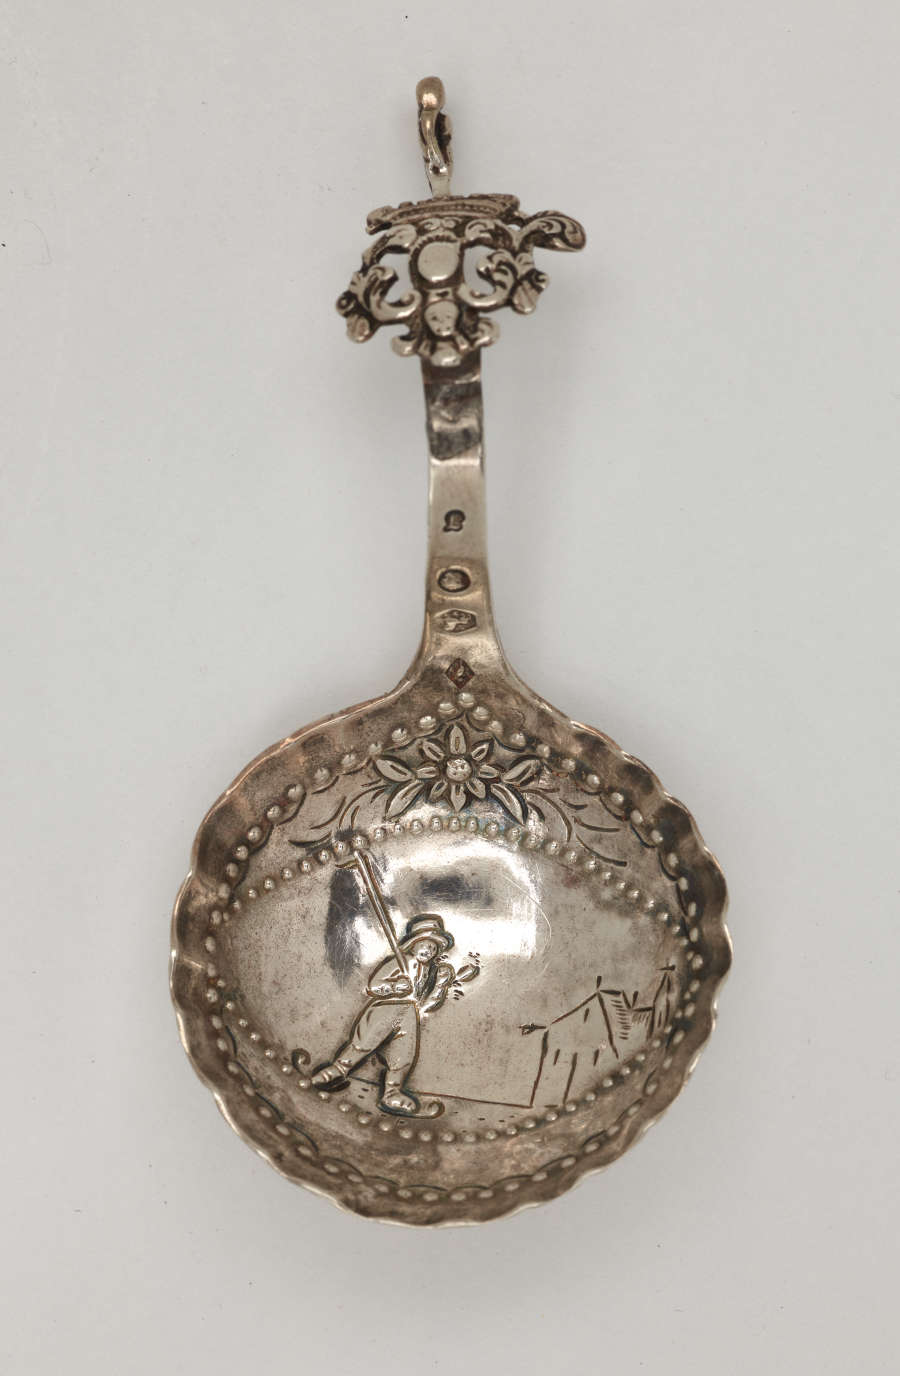  A silver caddy spoon with figurative and sculptural elements.